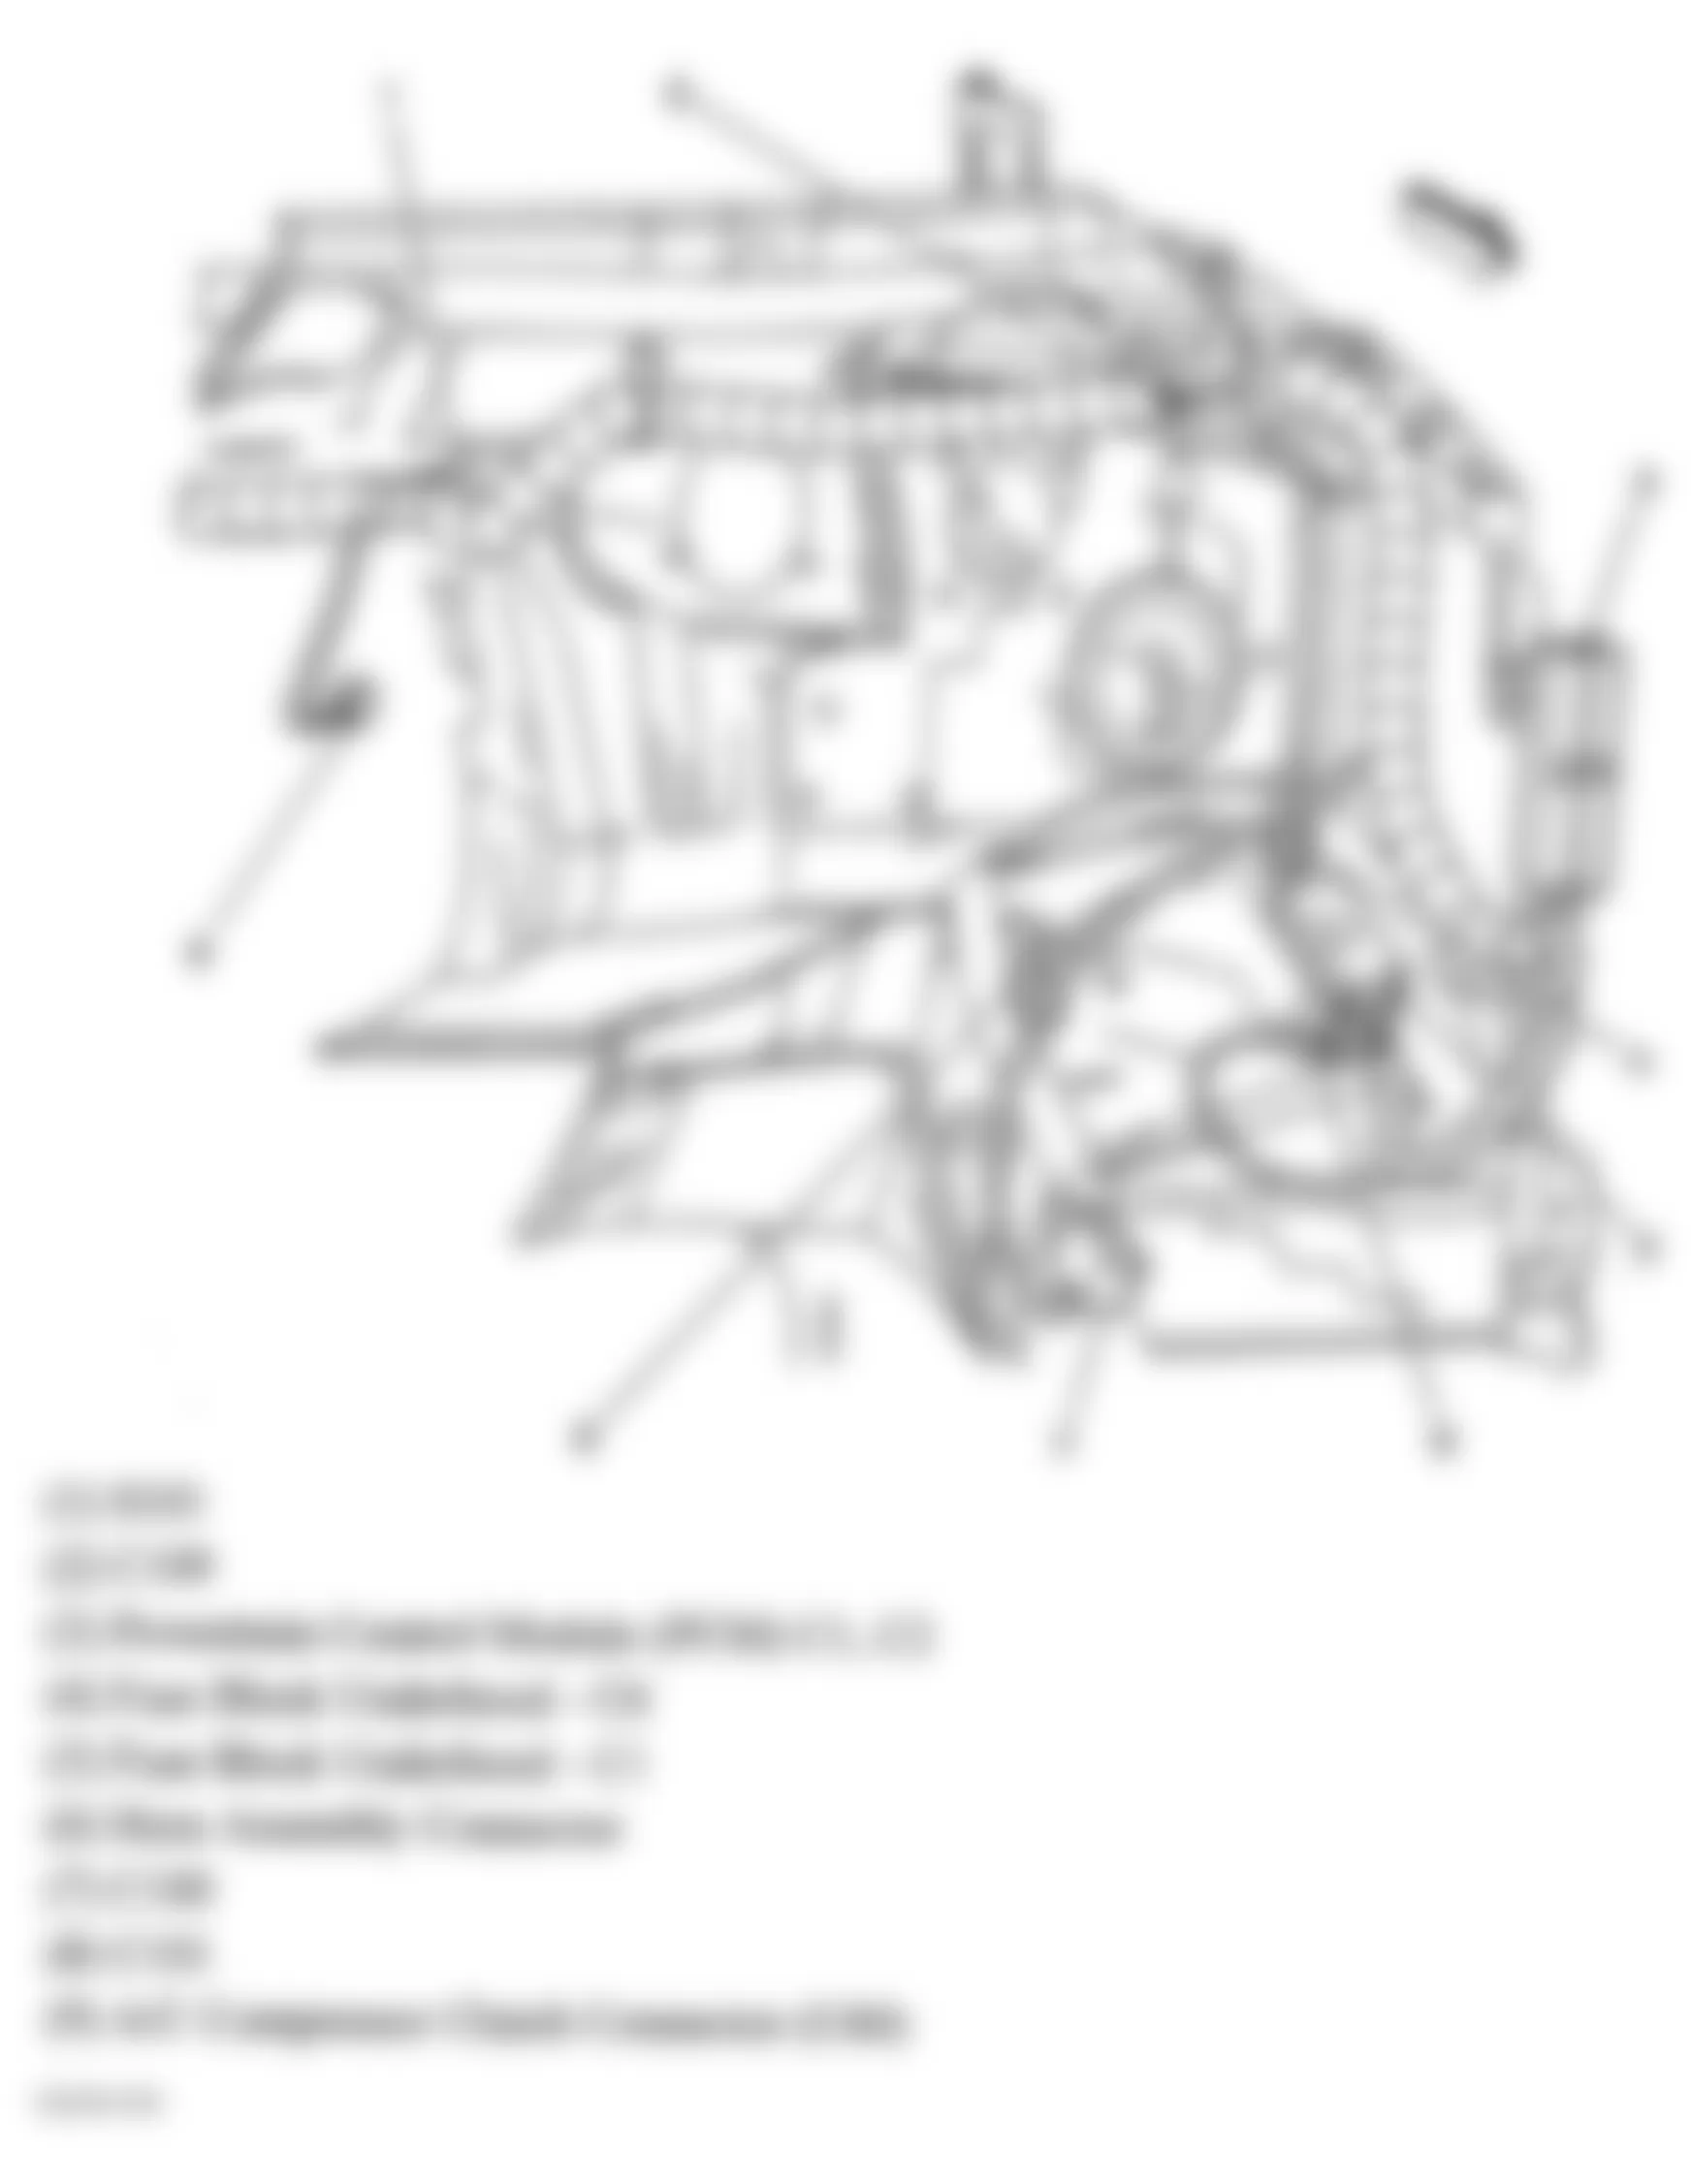 GMC Savana G3500 2005 - Component Locations -  Left Rear Of Engine Compartment